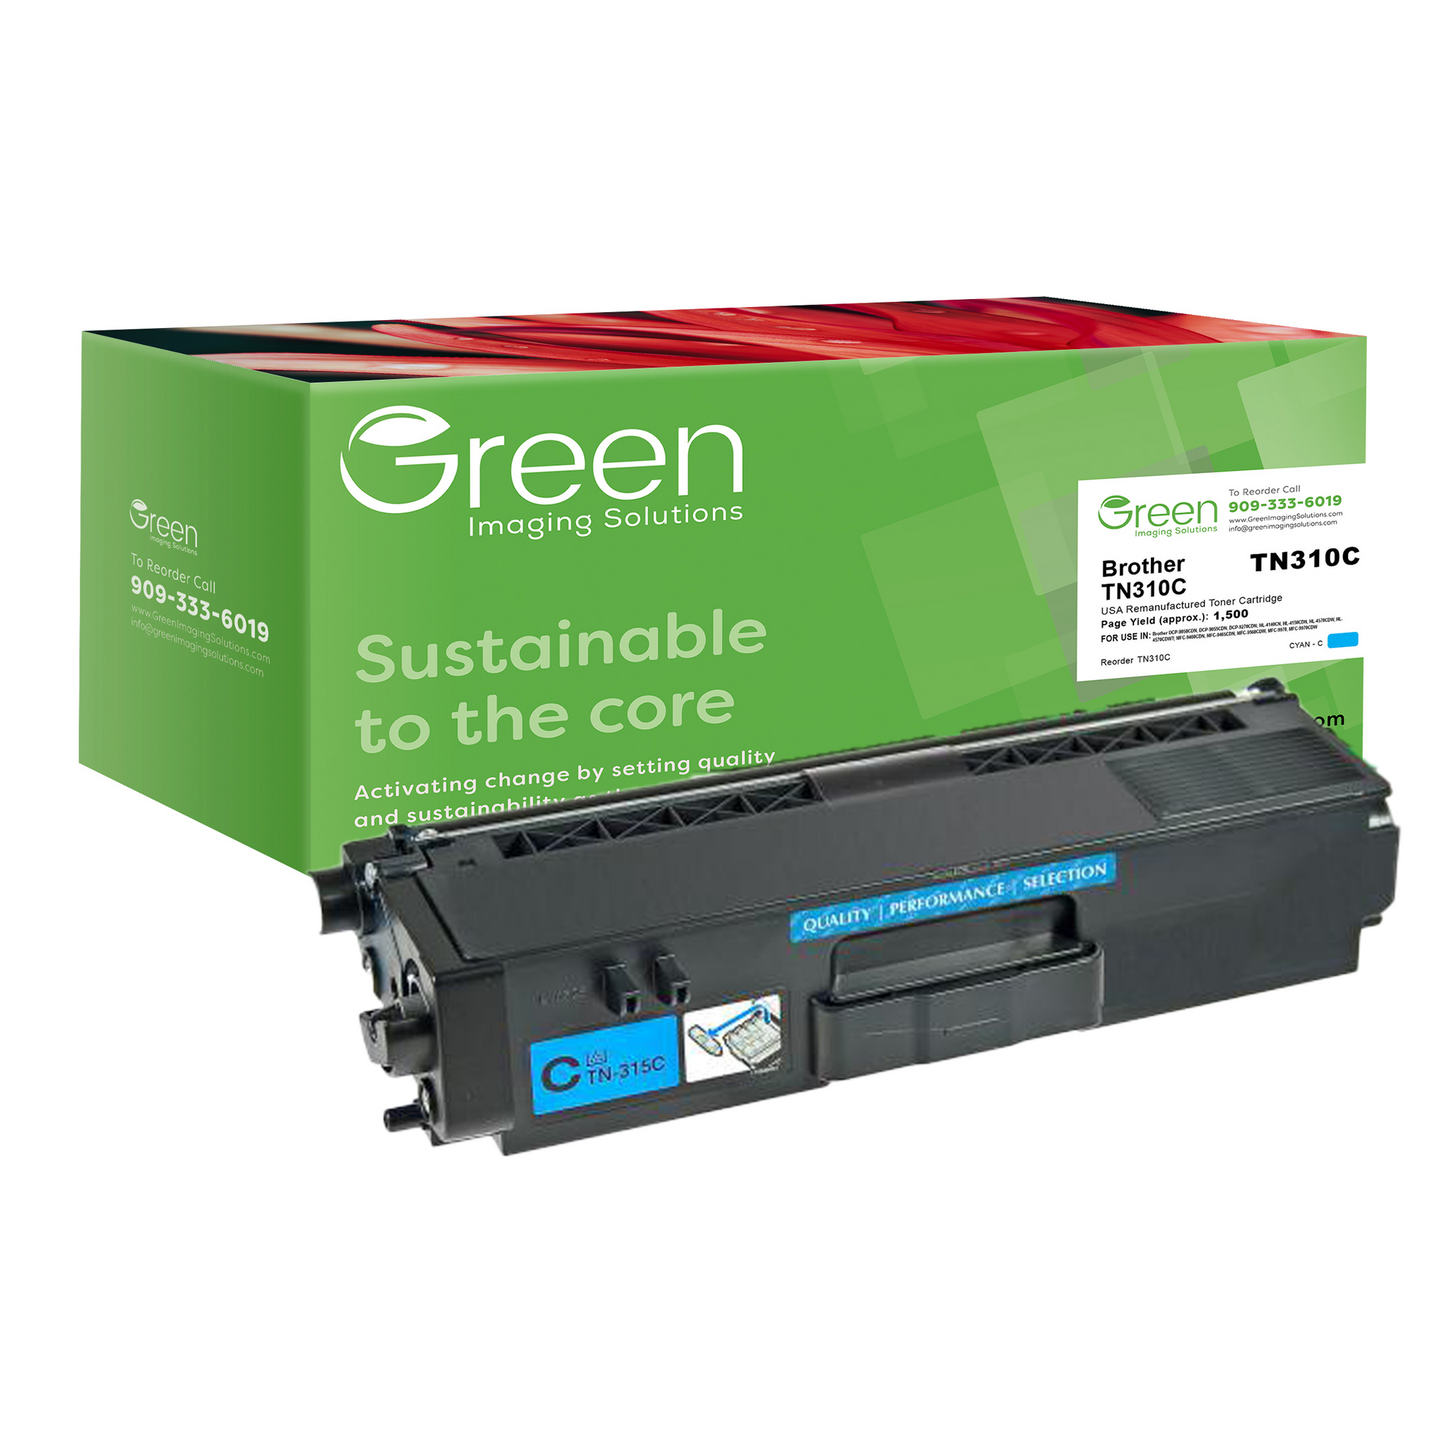 Green Imaging Solutions USA Remanufactured Cyan Toner Cartridge for Brother TN310